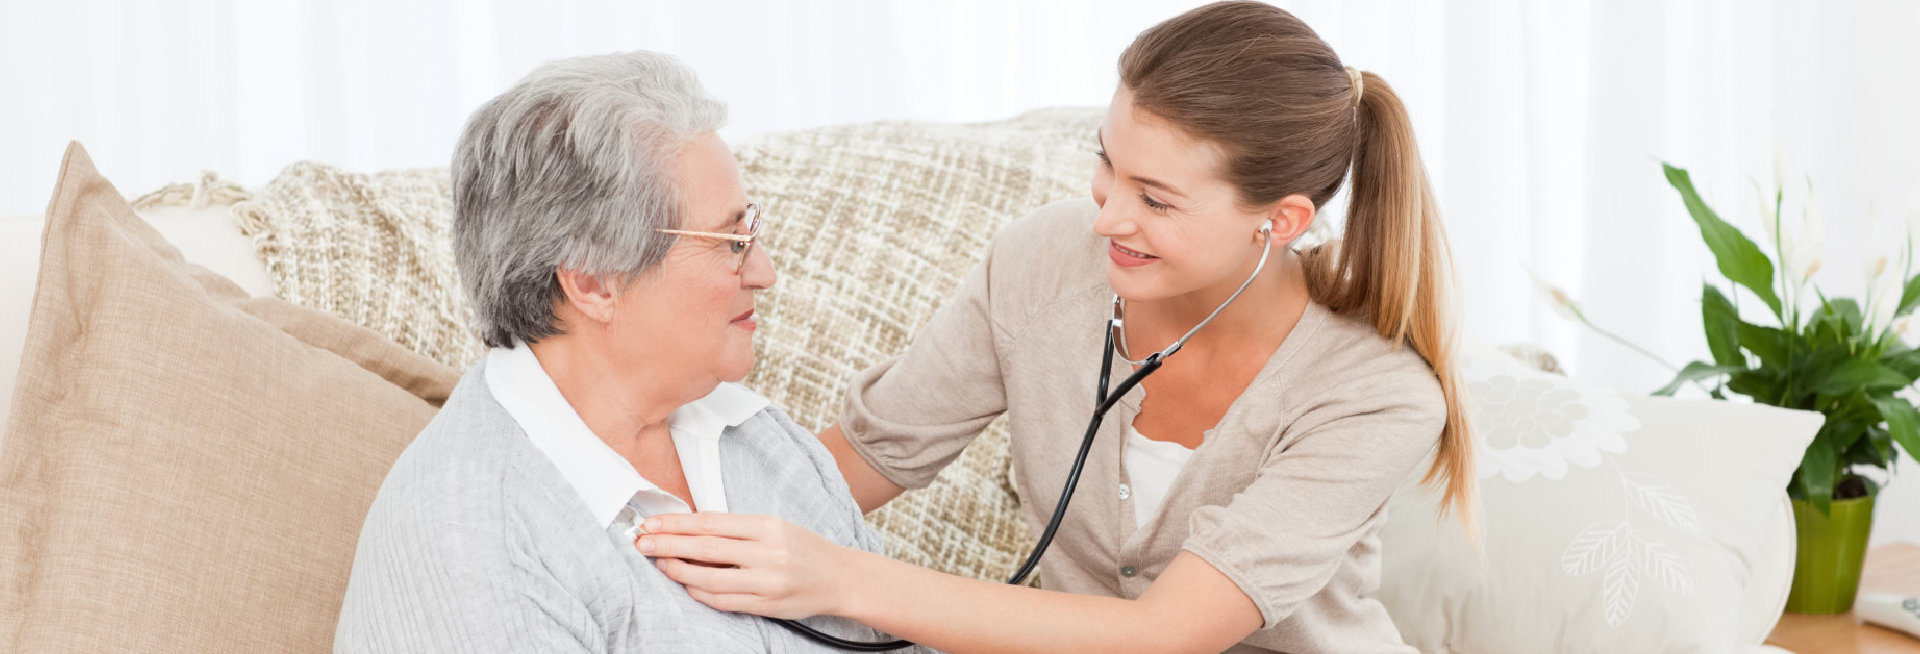 The Most Trustable Home Healthcare Agencies in Texas – A Hug Away